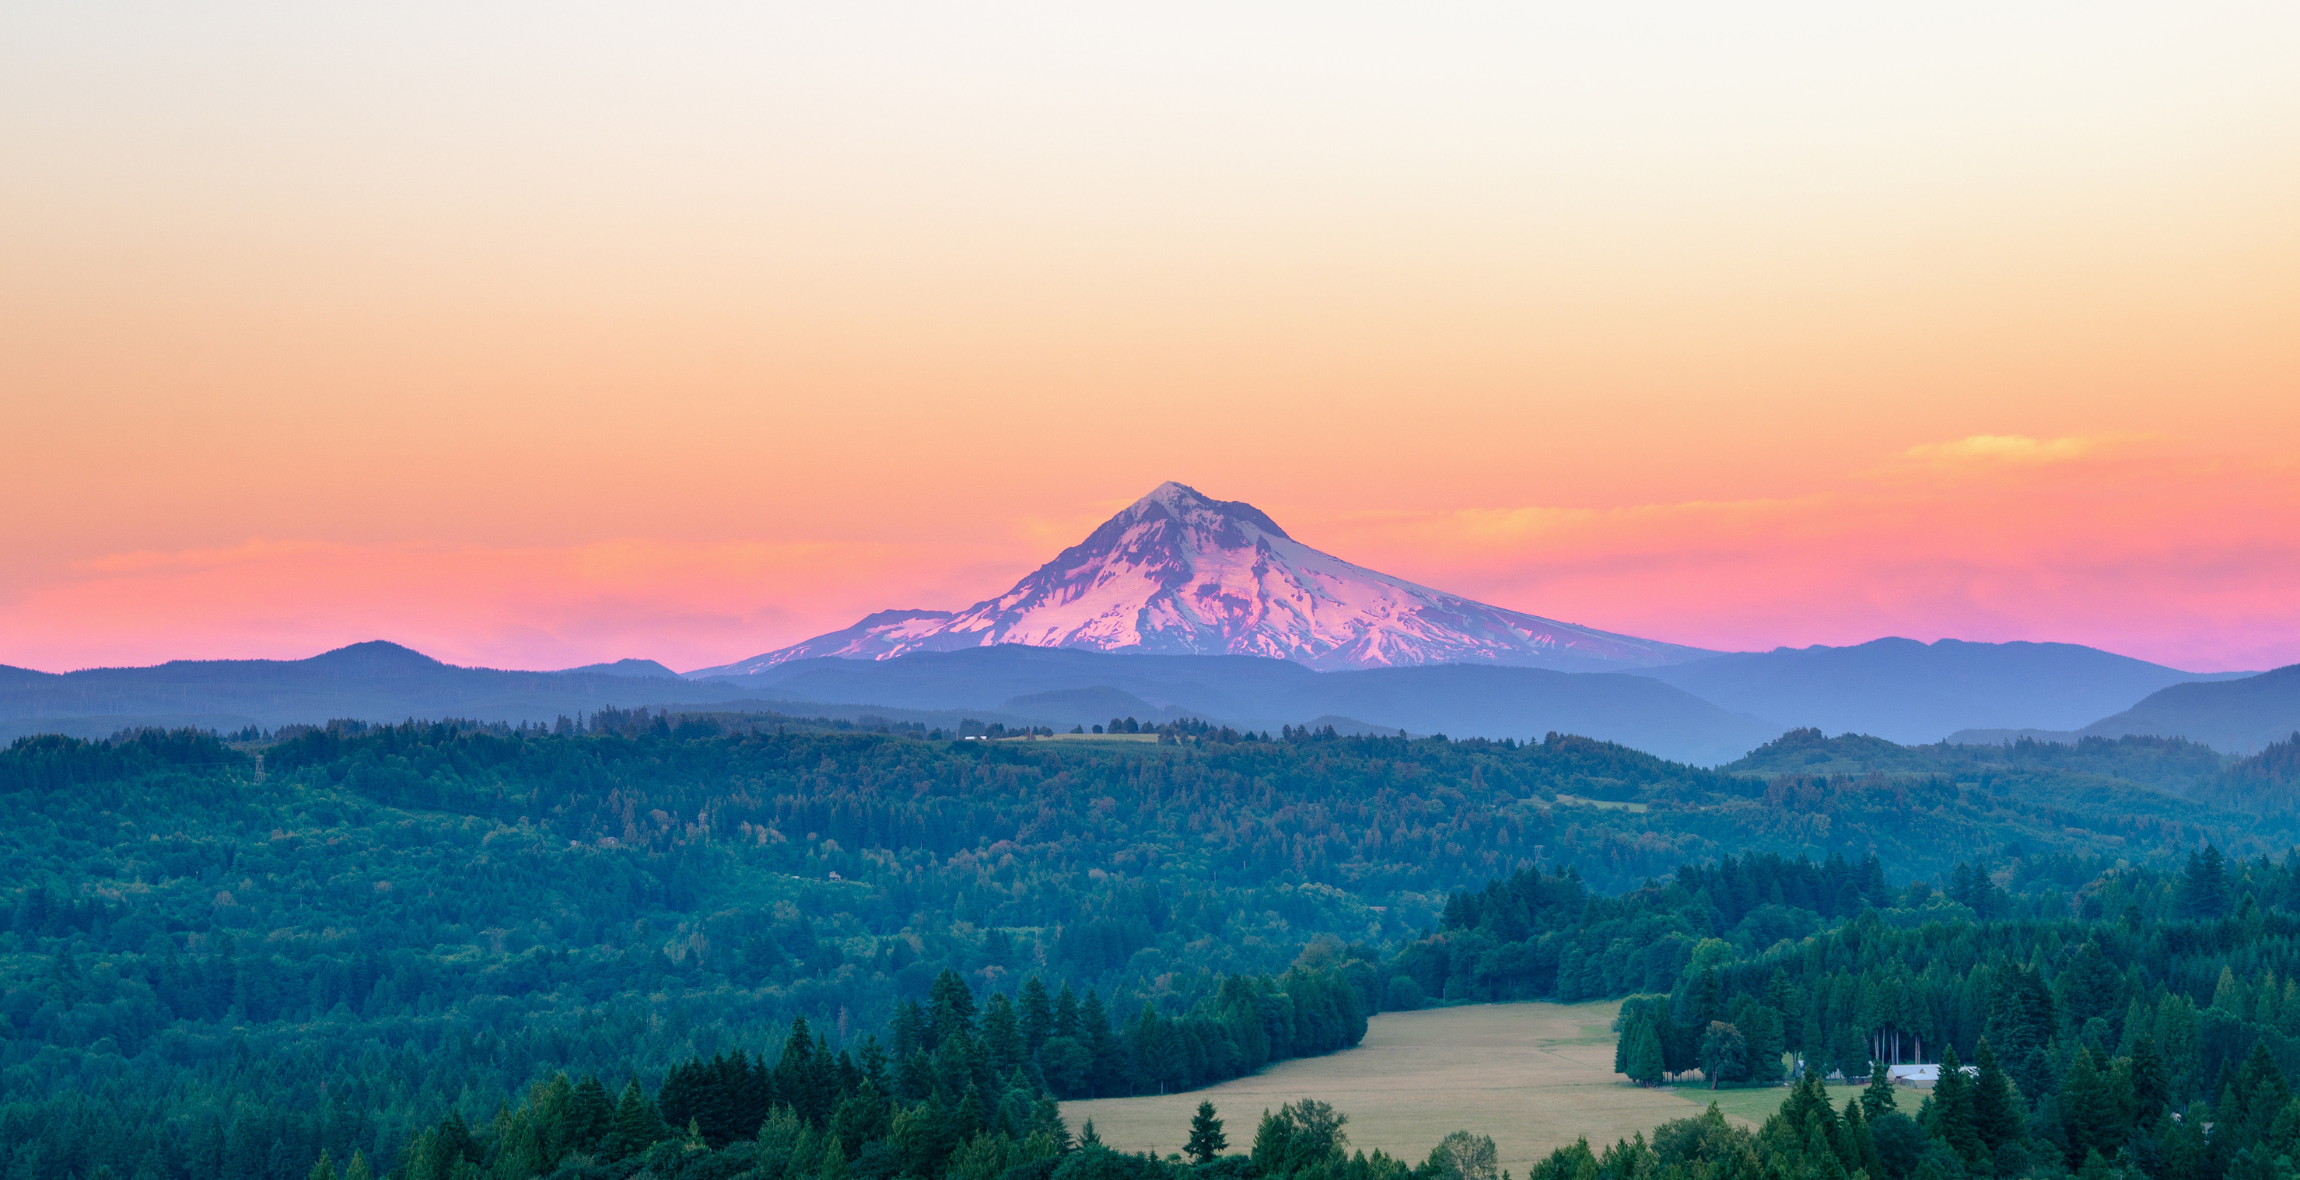 A mountain during a pink sunset in Oregon USA